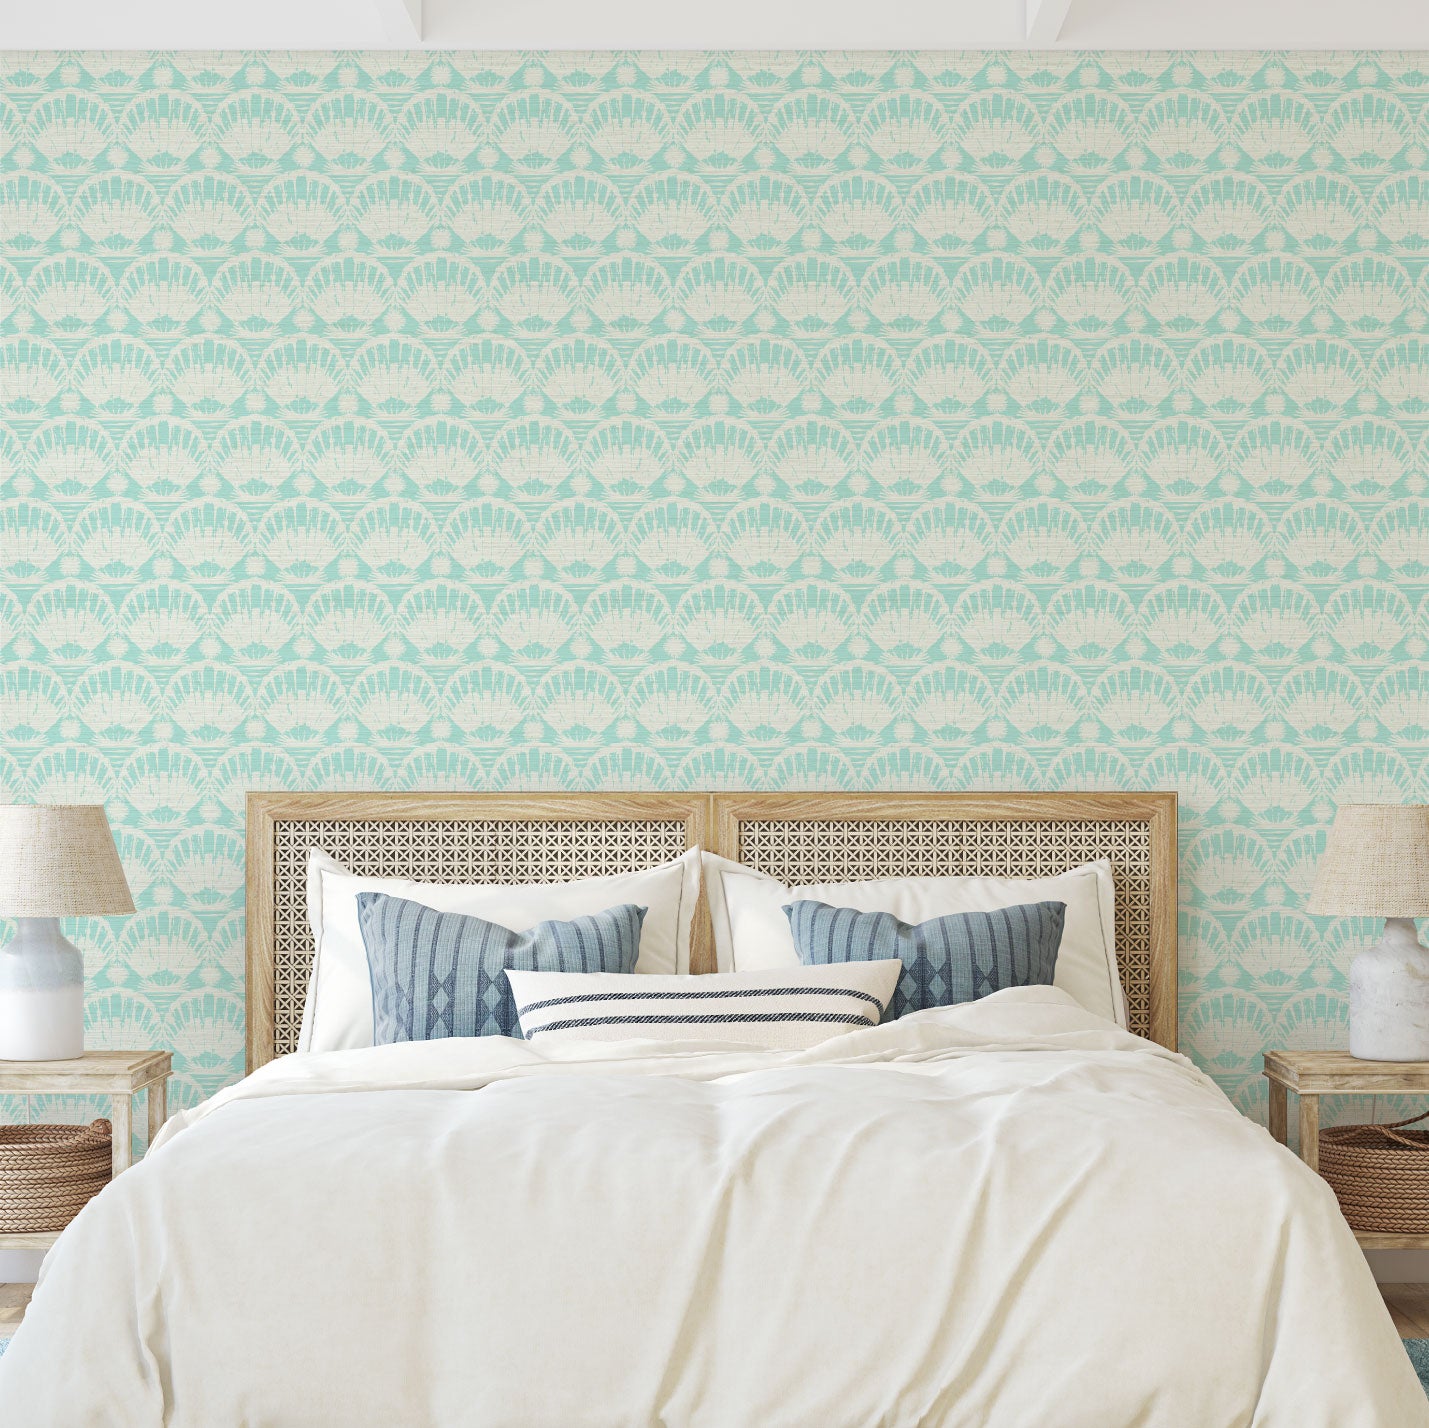 printed grasscloth wallpaper in a 2 color stamped seashell print arranged in a linear horizontal pattern